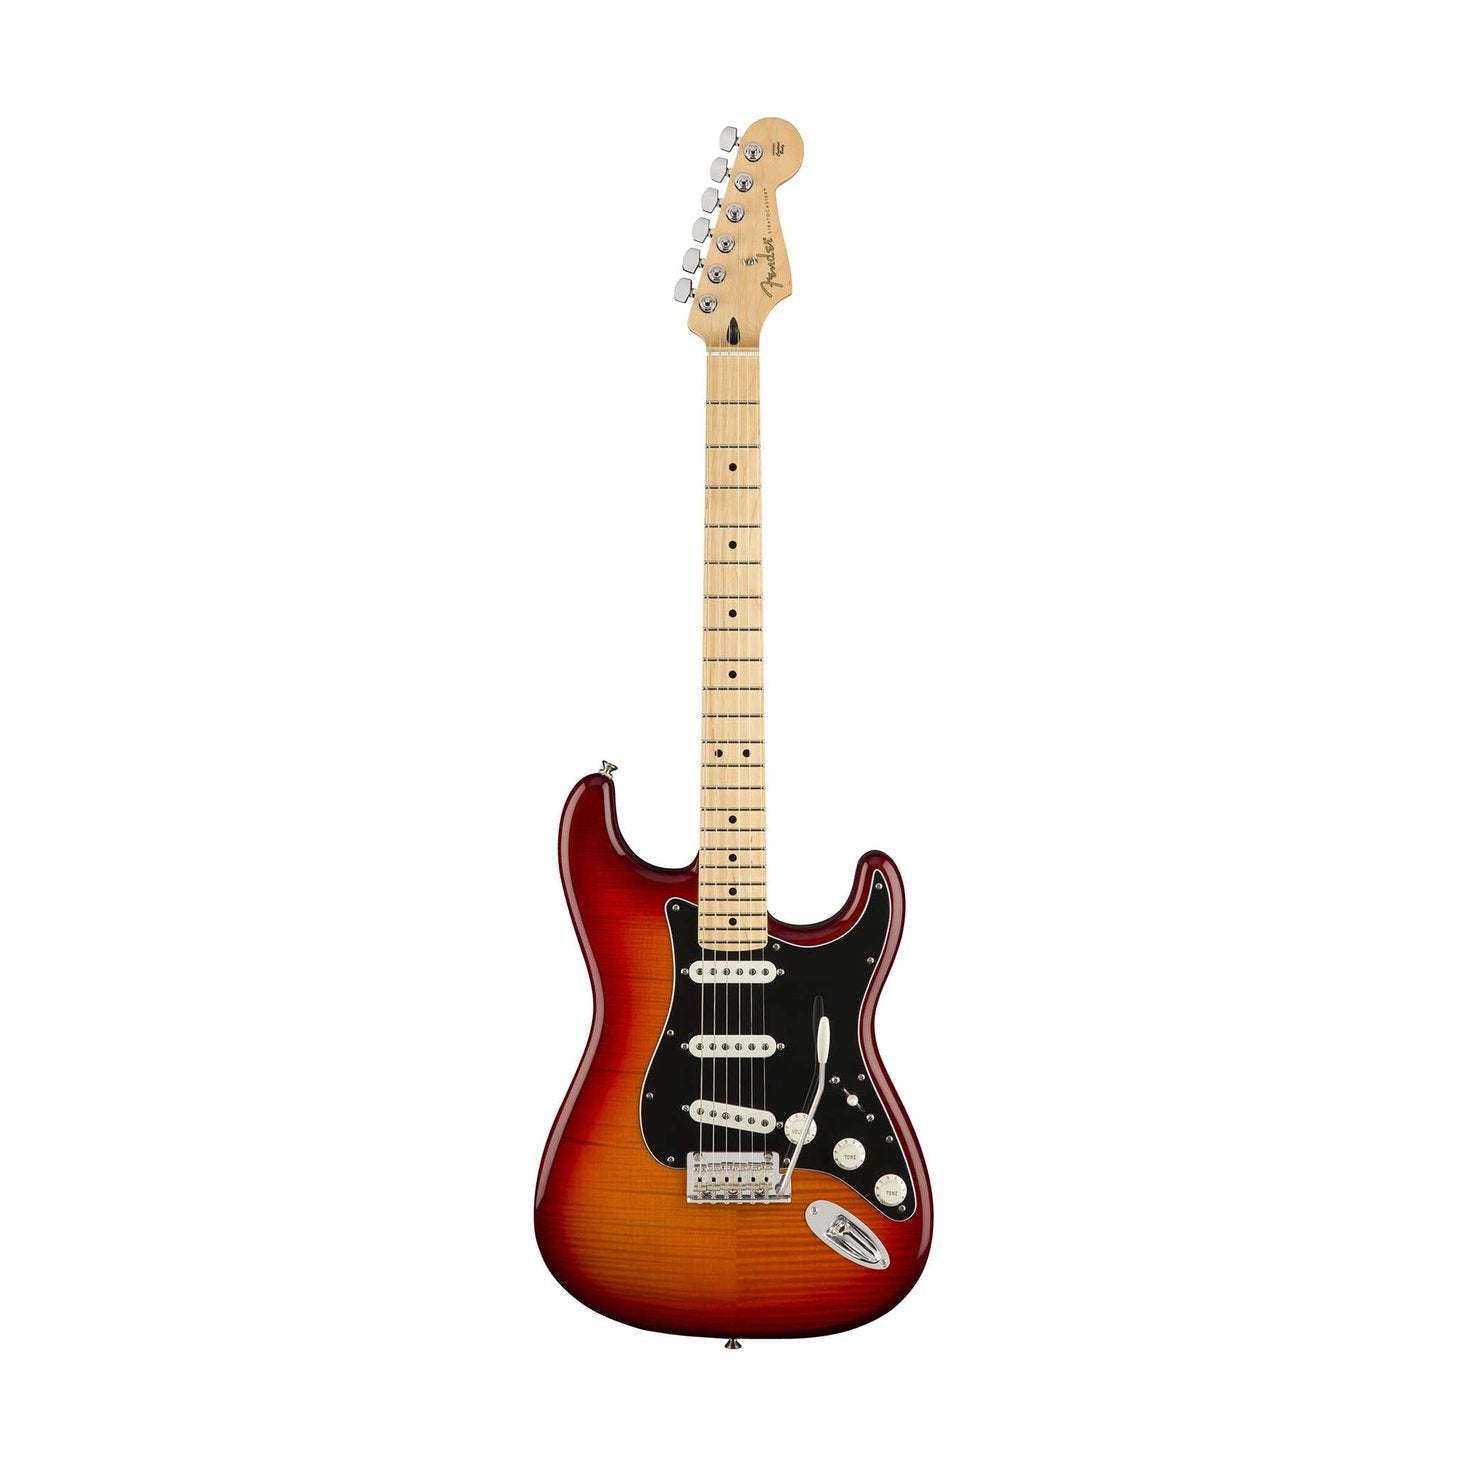 Fender Player Plus Top Stratocaster Electric Guitar, Maple FB, Aged Cherry Burst, FENDER, ELECTRIC GUITAR, fender-eletric-guitar-f03-014-4552-531, ZOSO MUSIC SDN BHD